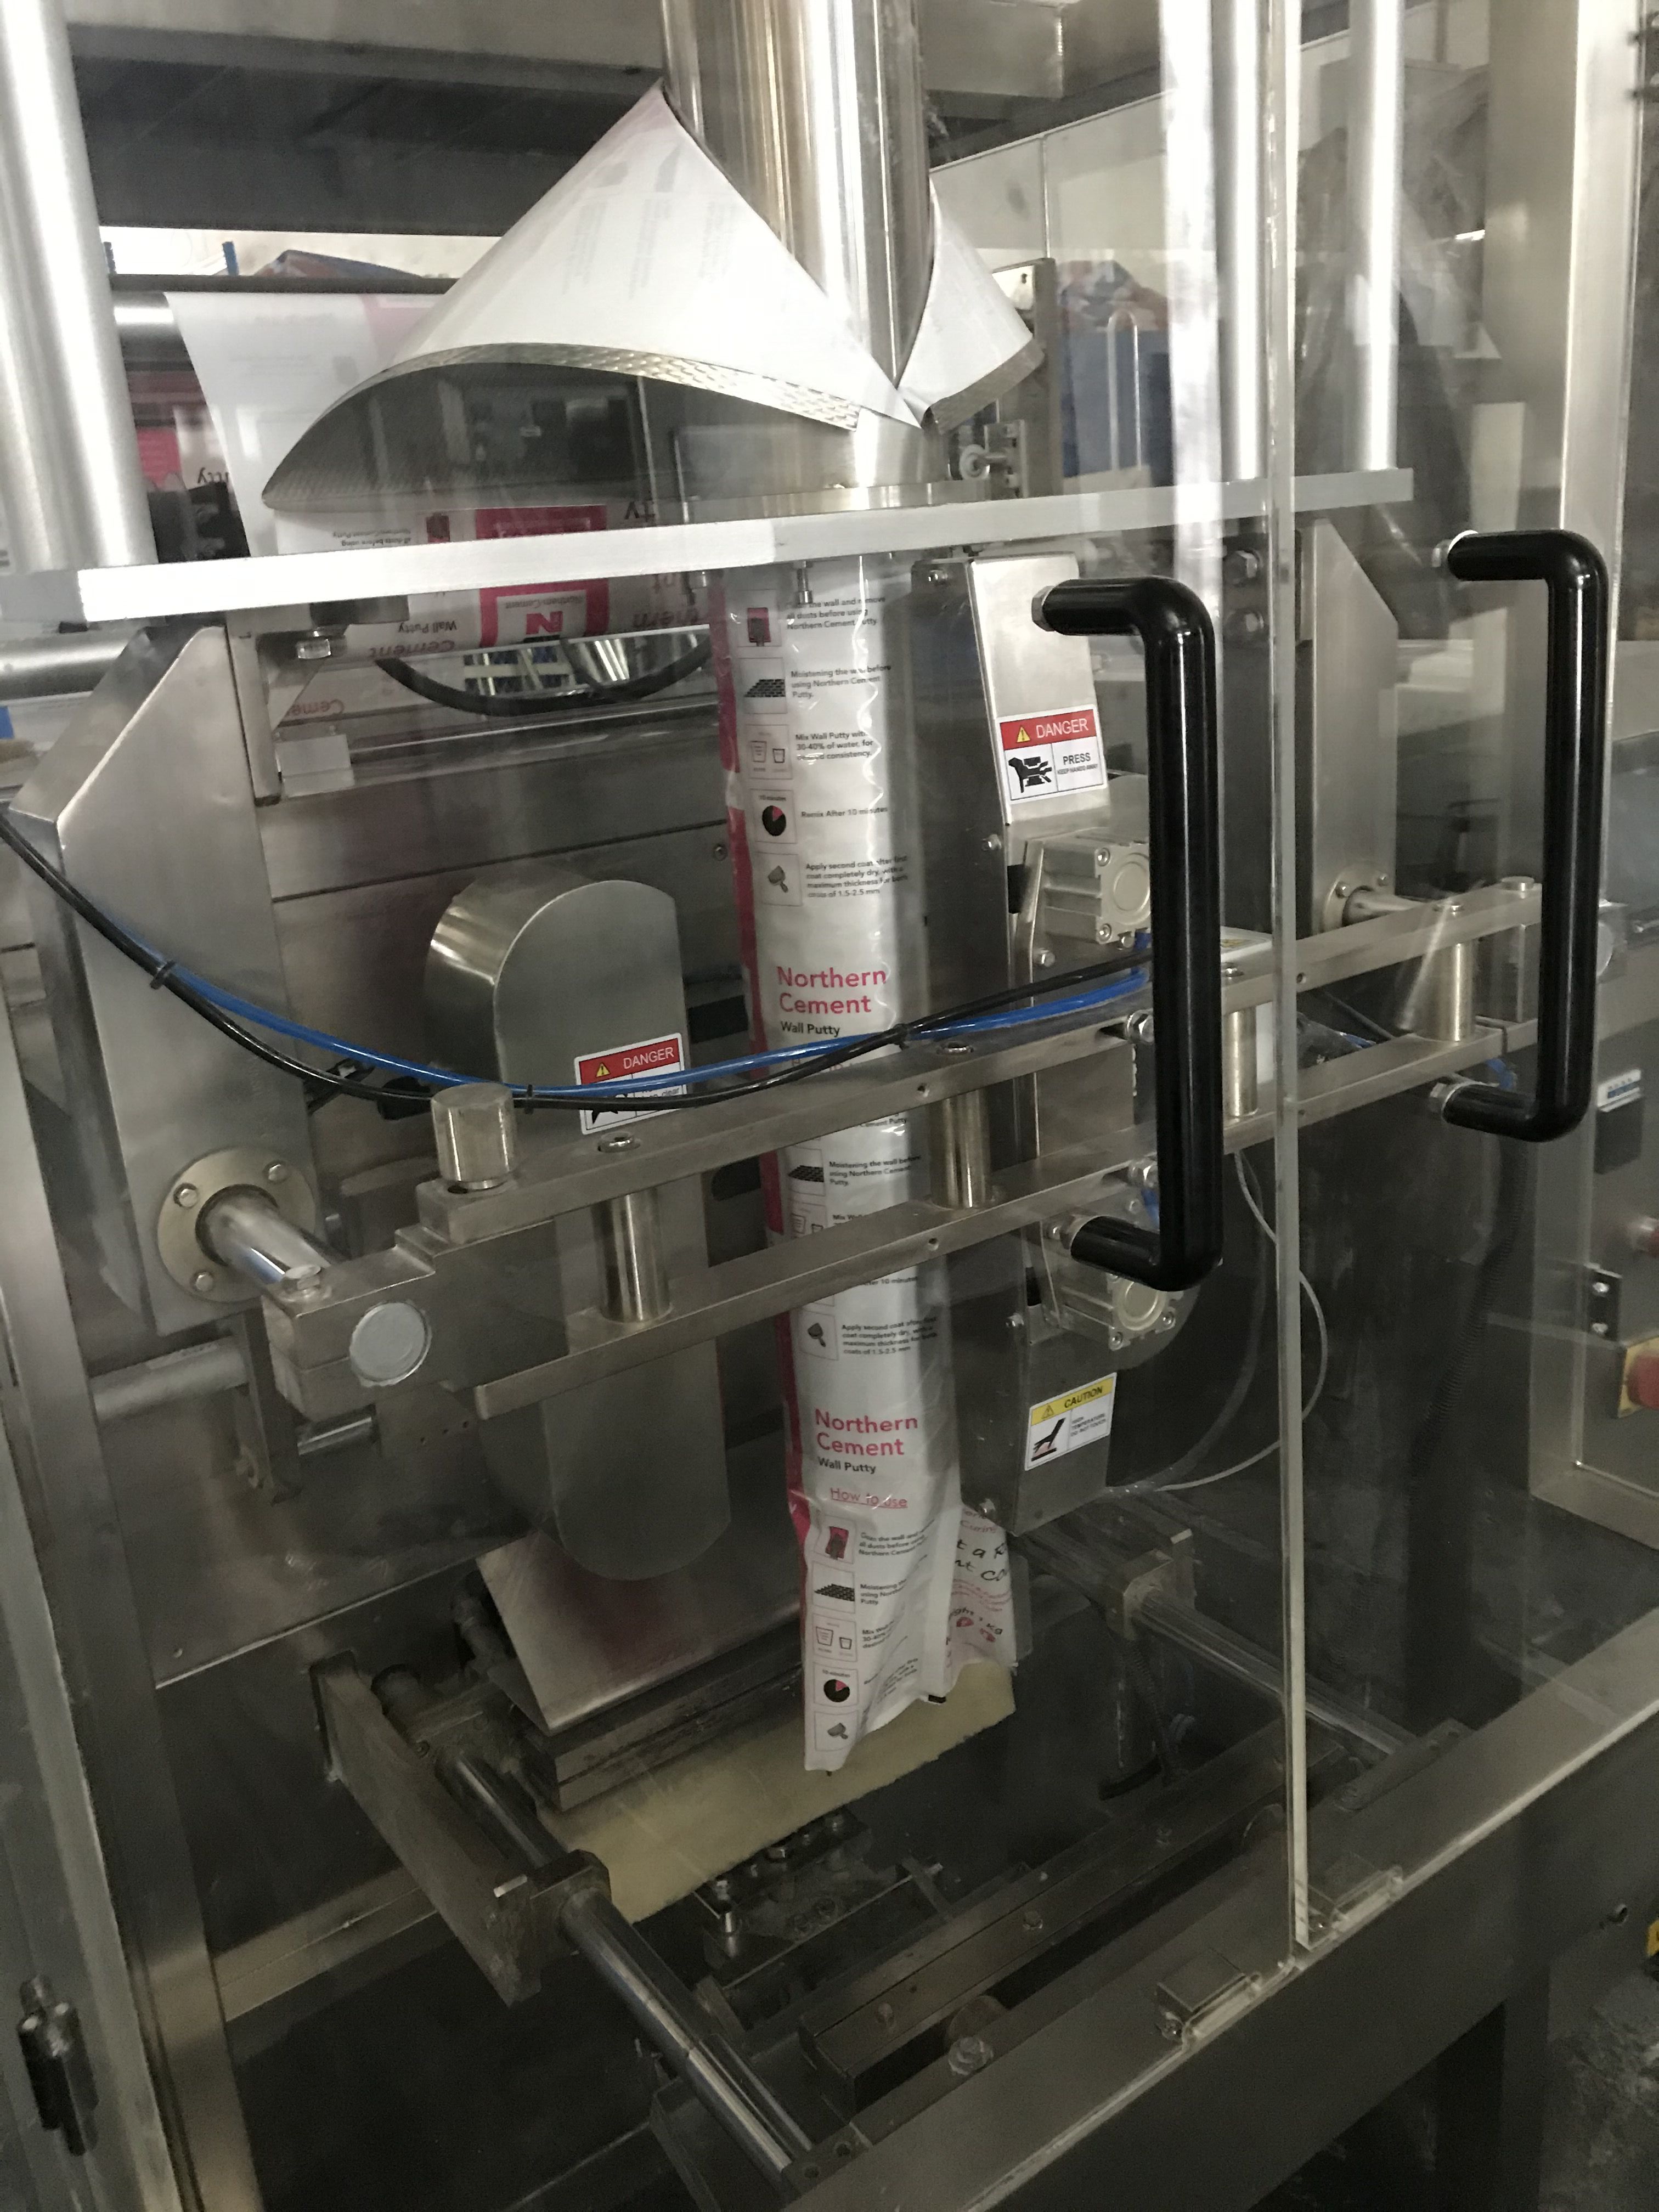 VFFS packing machine for Milk powder and flour VFFS packaging machine for Dried vegetables such as lentils, half peas full centralised automated packing and palletizing line for sugar crystal 50kg bag